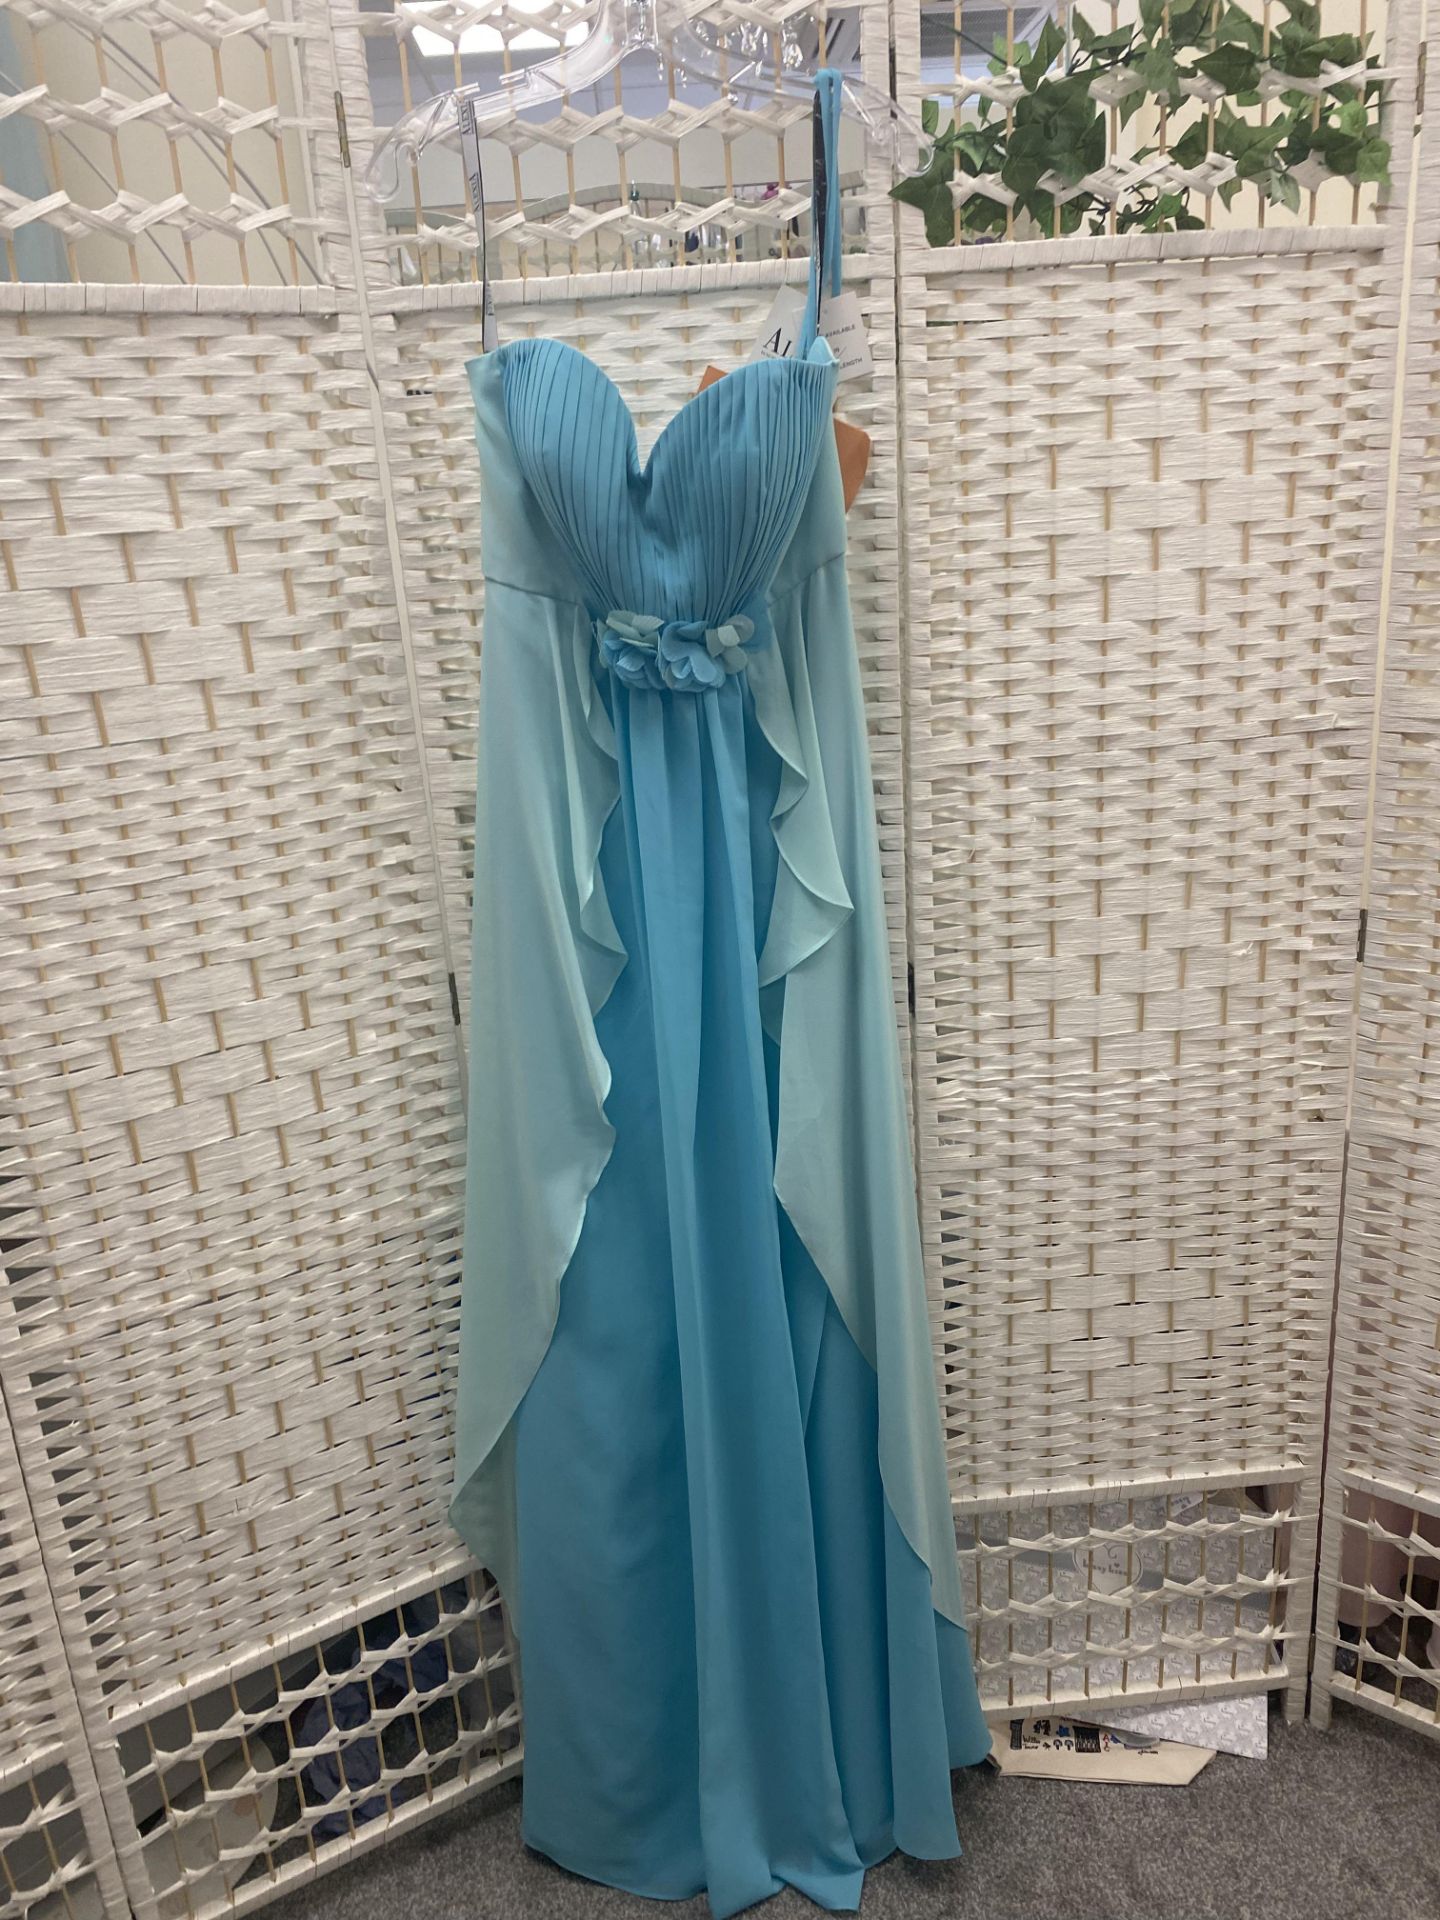 Alexia Designs Prom Dress Ivory and Turquoise Size 10 - Image 3 of 3